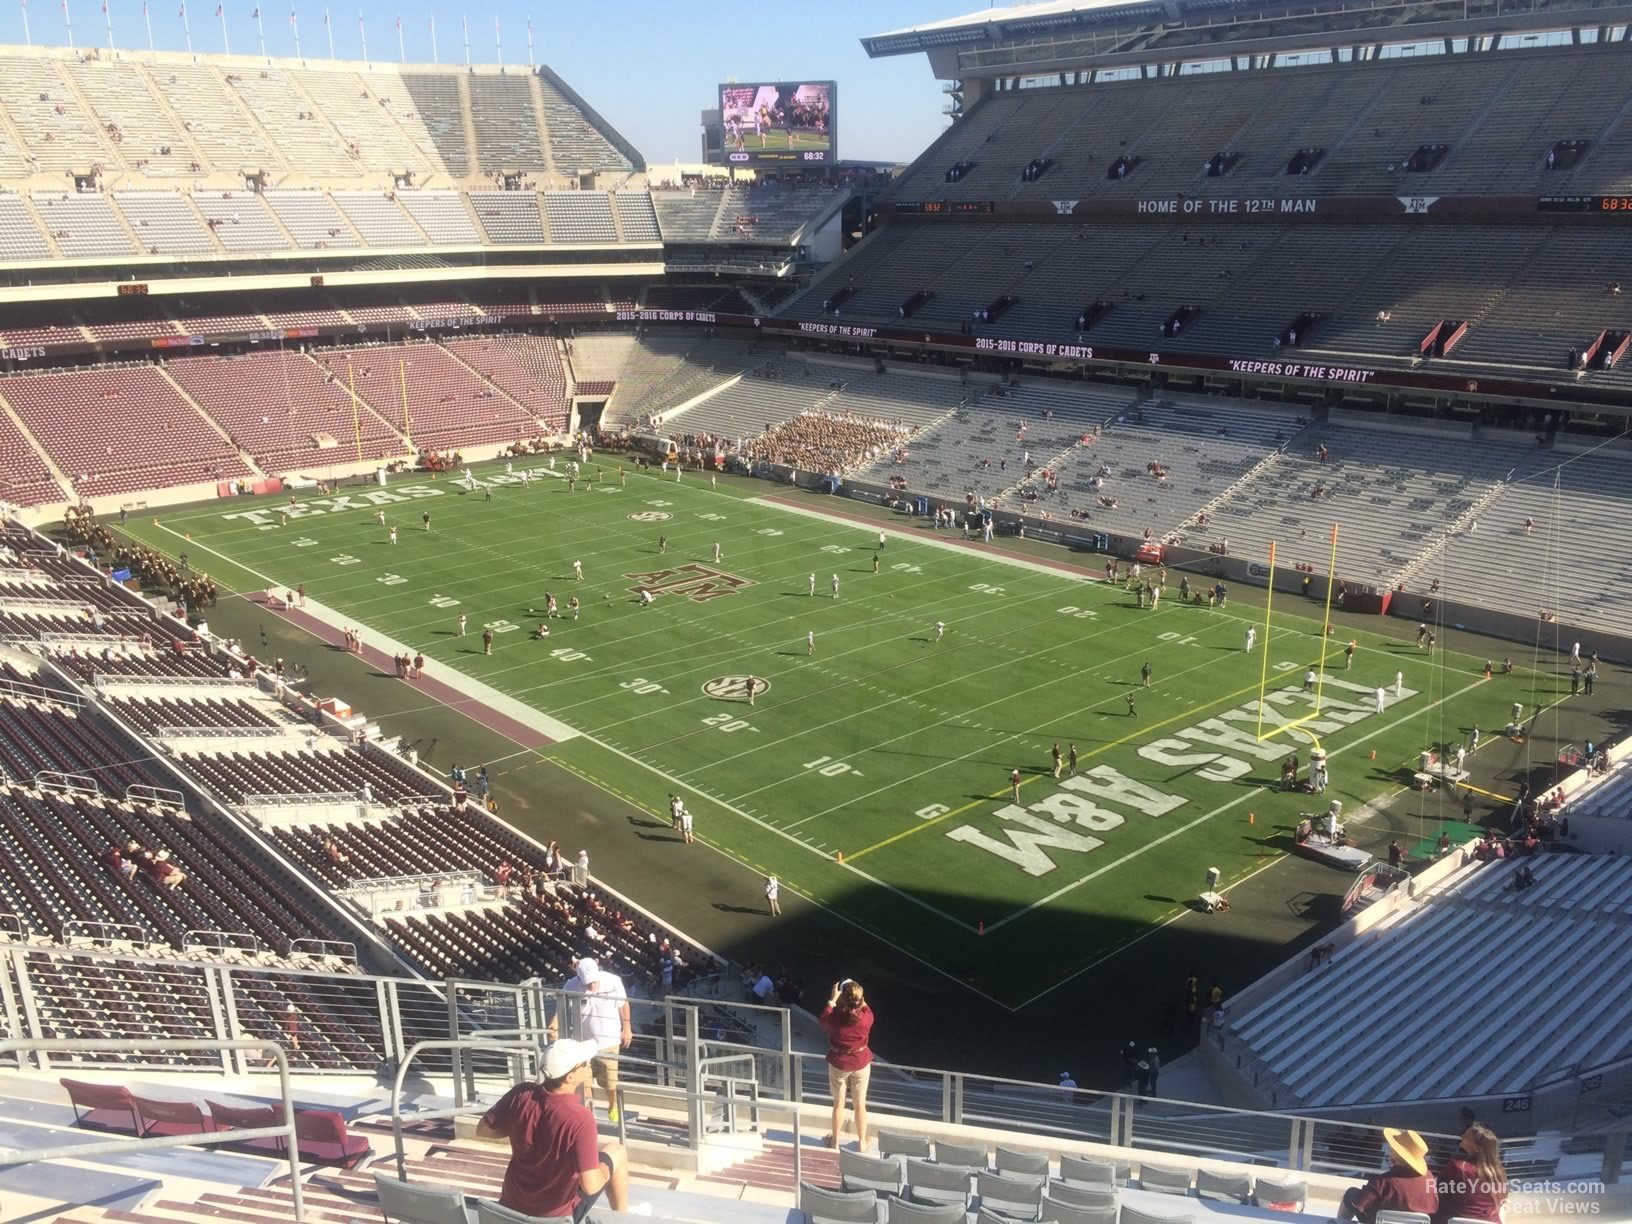 section 351, row 14 seat view  - kyle field